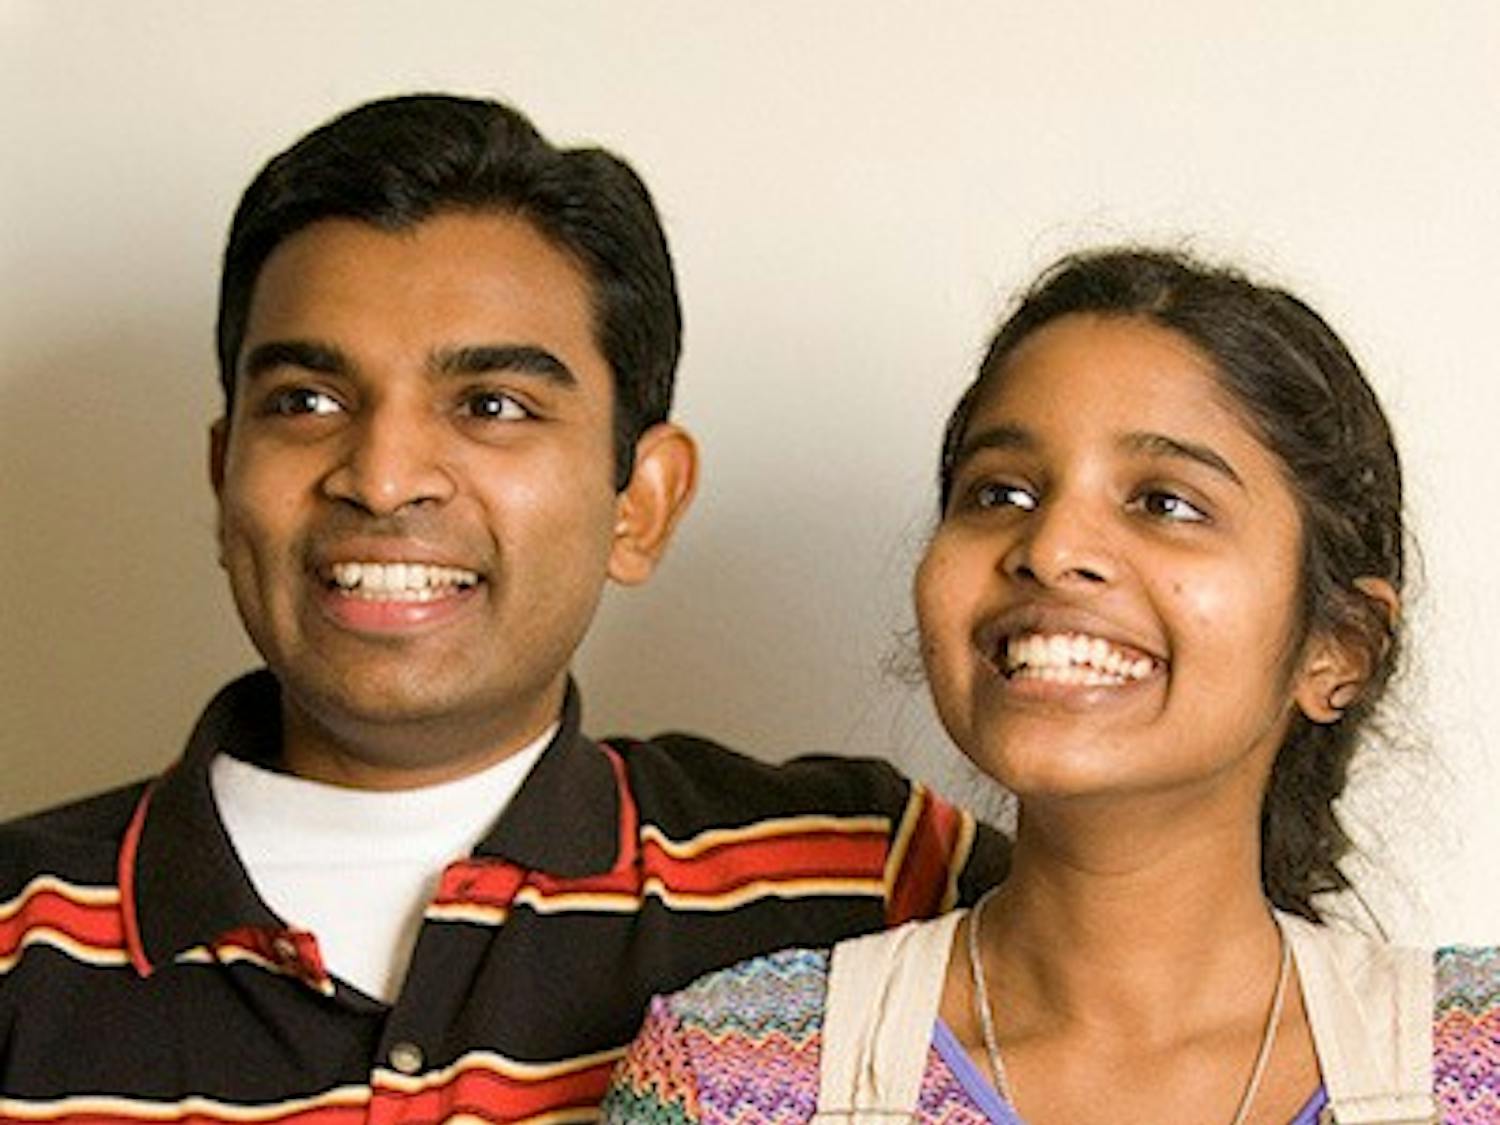 	Sadeepa Munasinghe (right) and her brother Chalan (left). Munasinghe needs to stay in the U.S. to continue treatment for her illness.